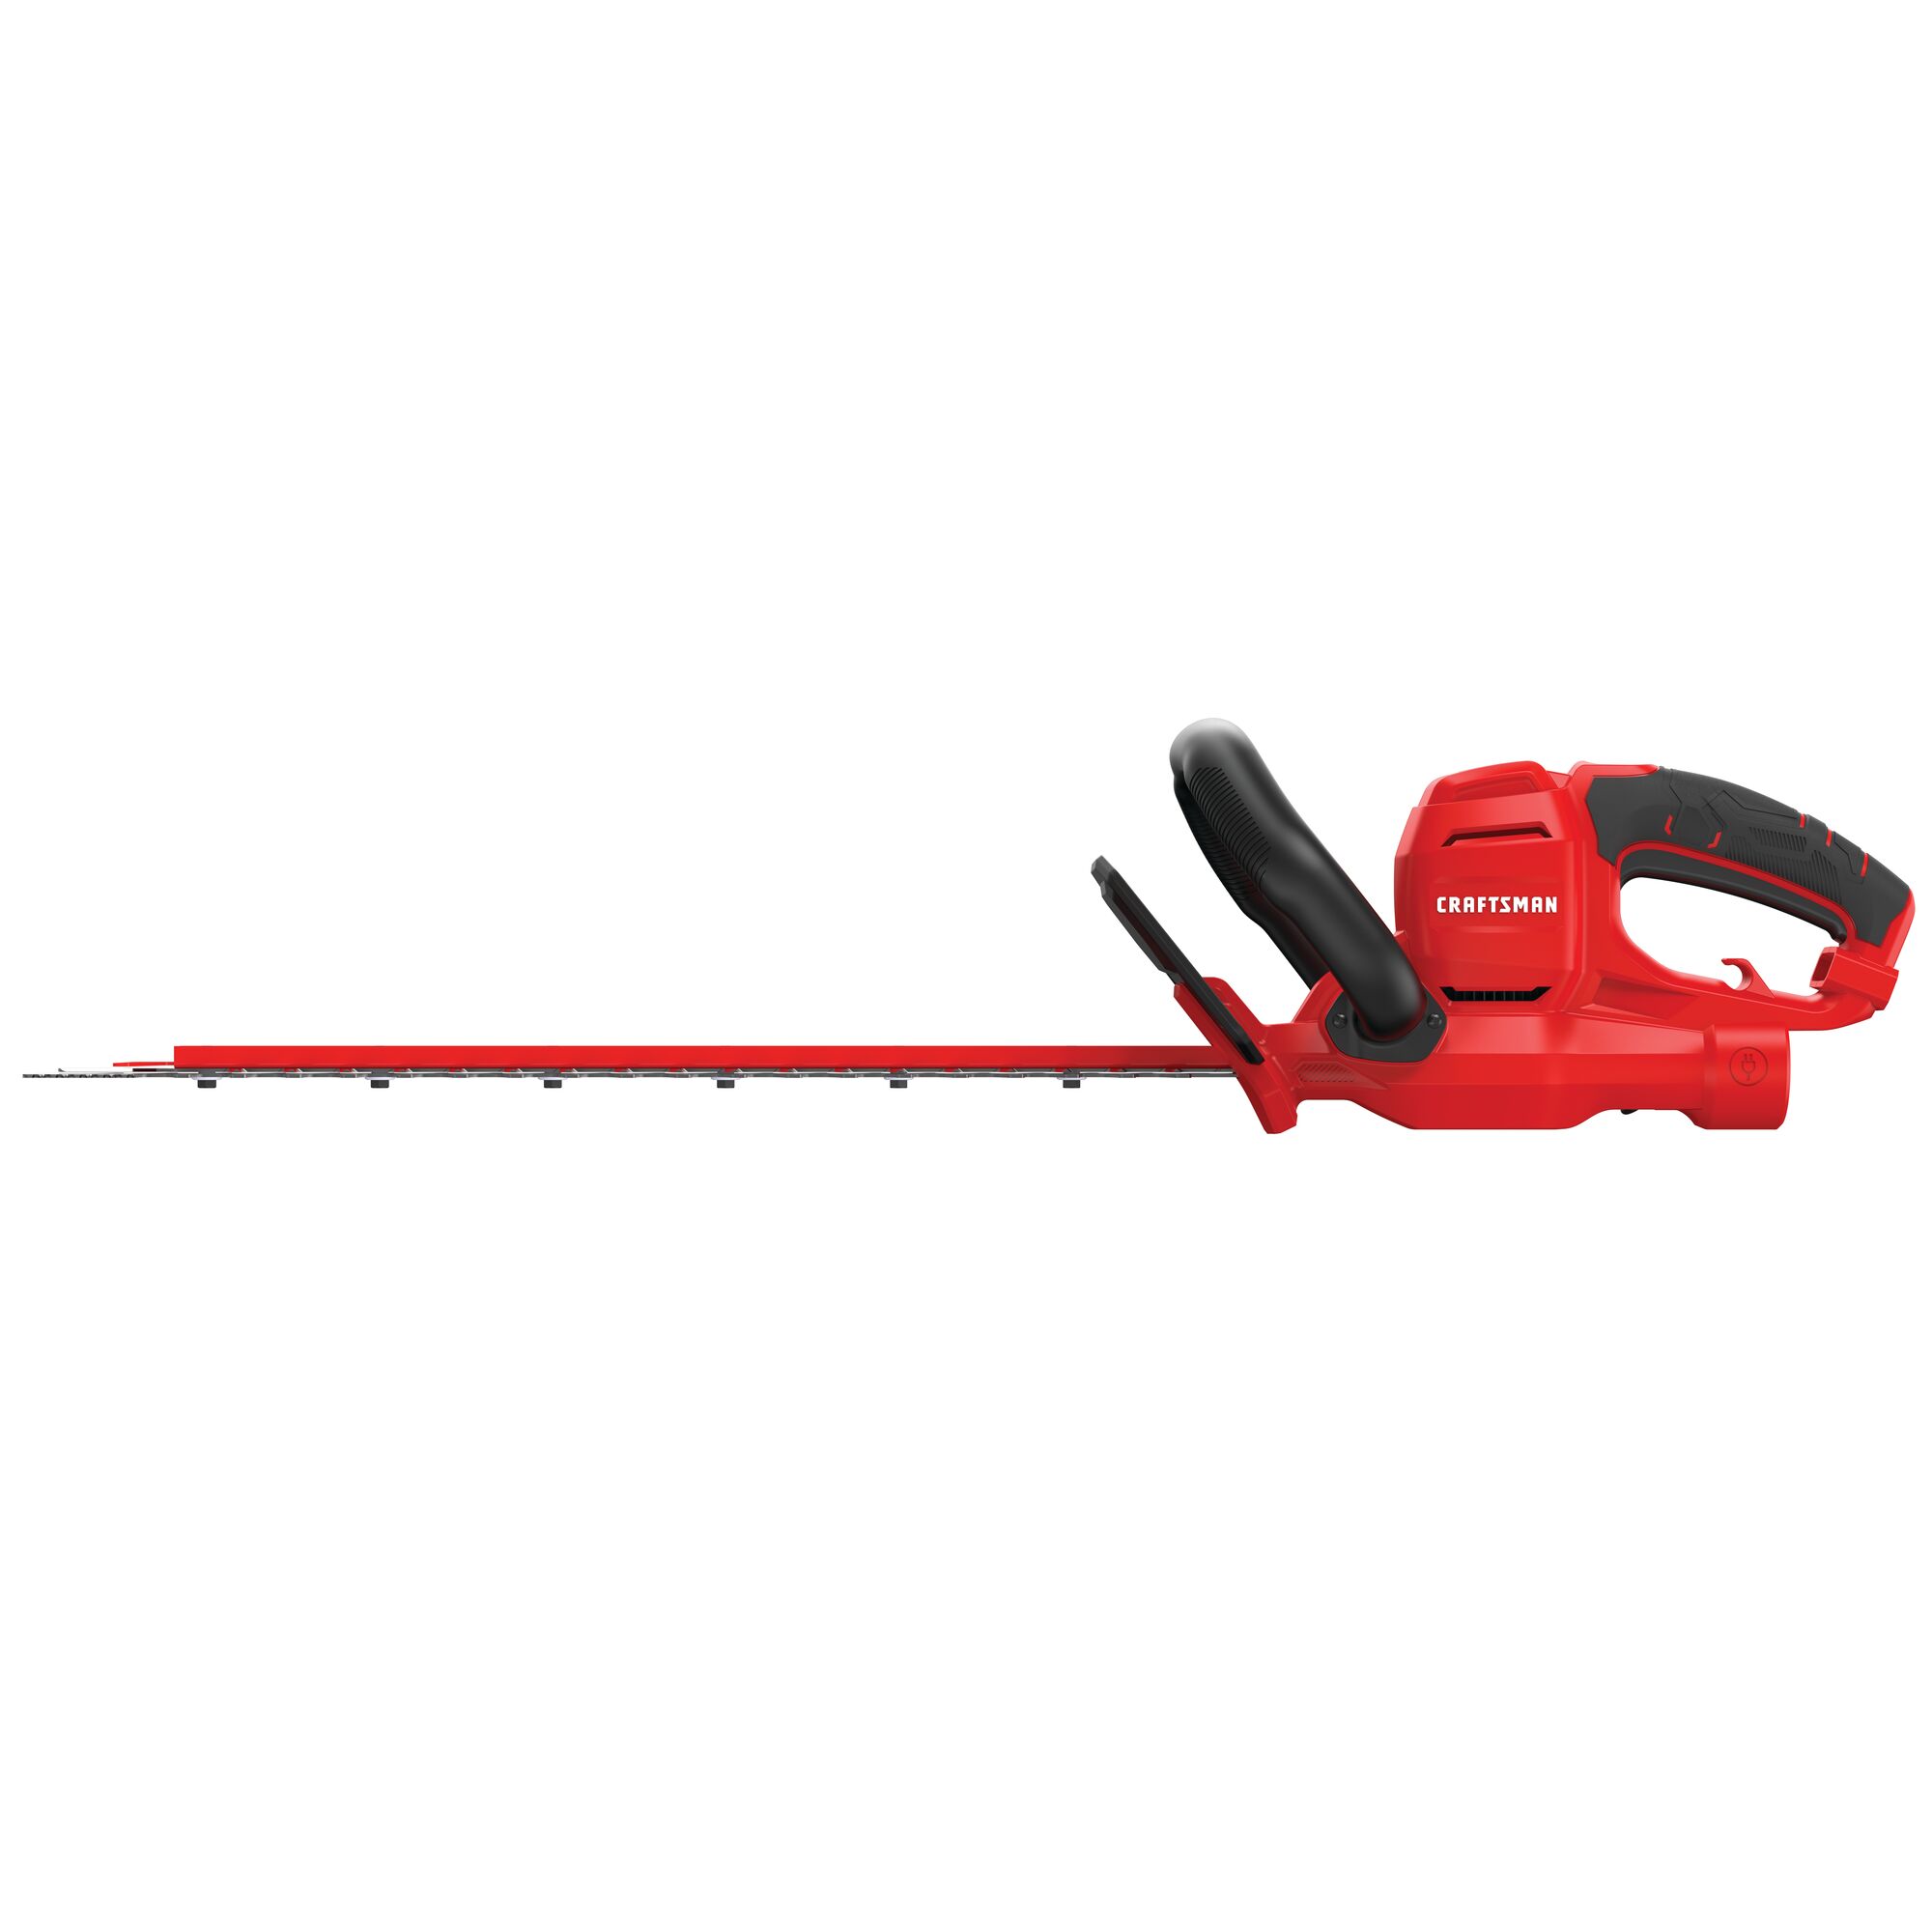 Profile of 3 dot 8 amp 22 inches corded hedge trimmer.